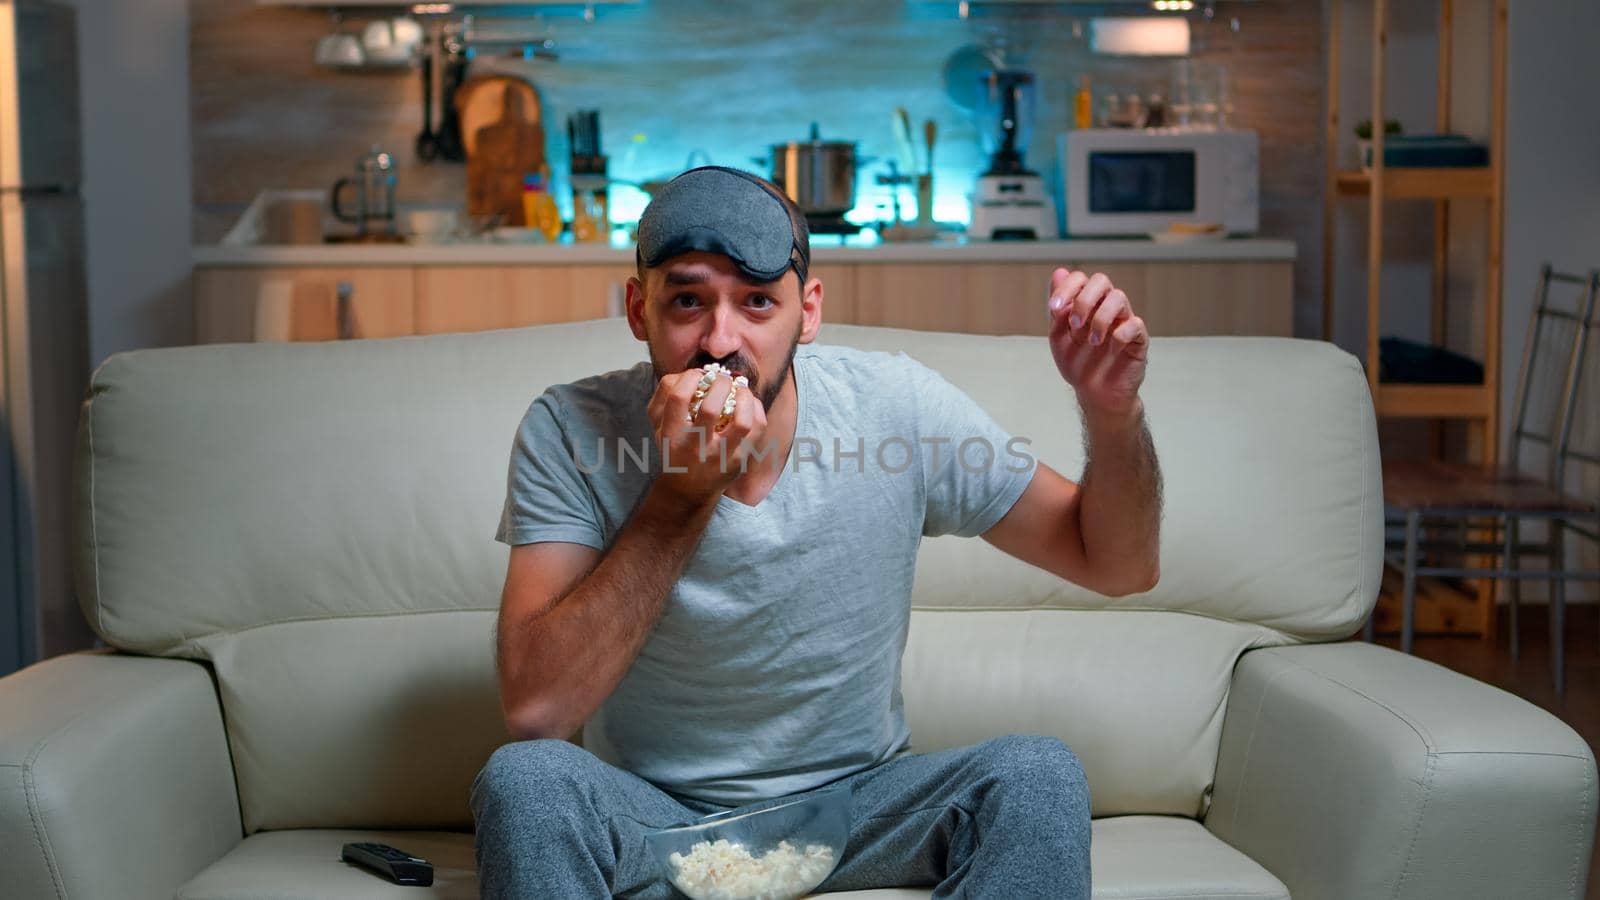 Big soccer football sport fan watching championship game, series finale, expressing anger dissapointment, favourite team loosing watching TV in living room. Throwing popcorn in anger dissapointment and frustration